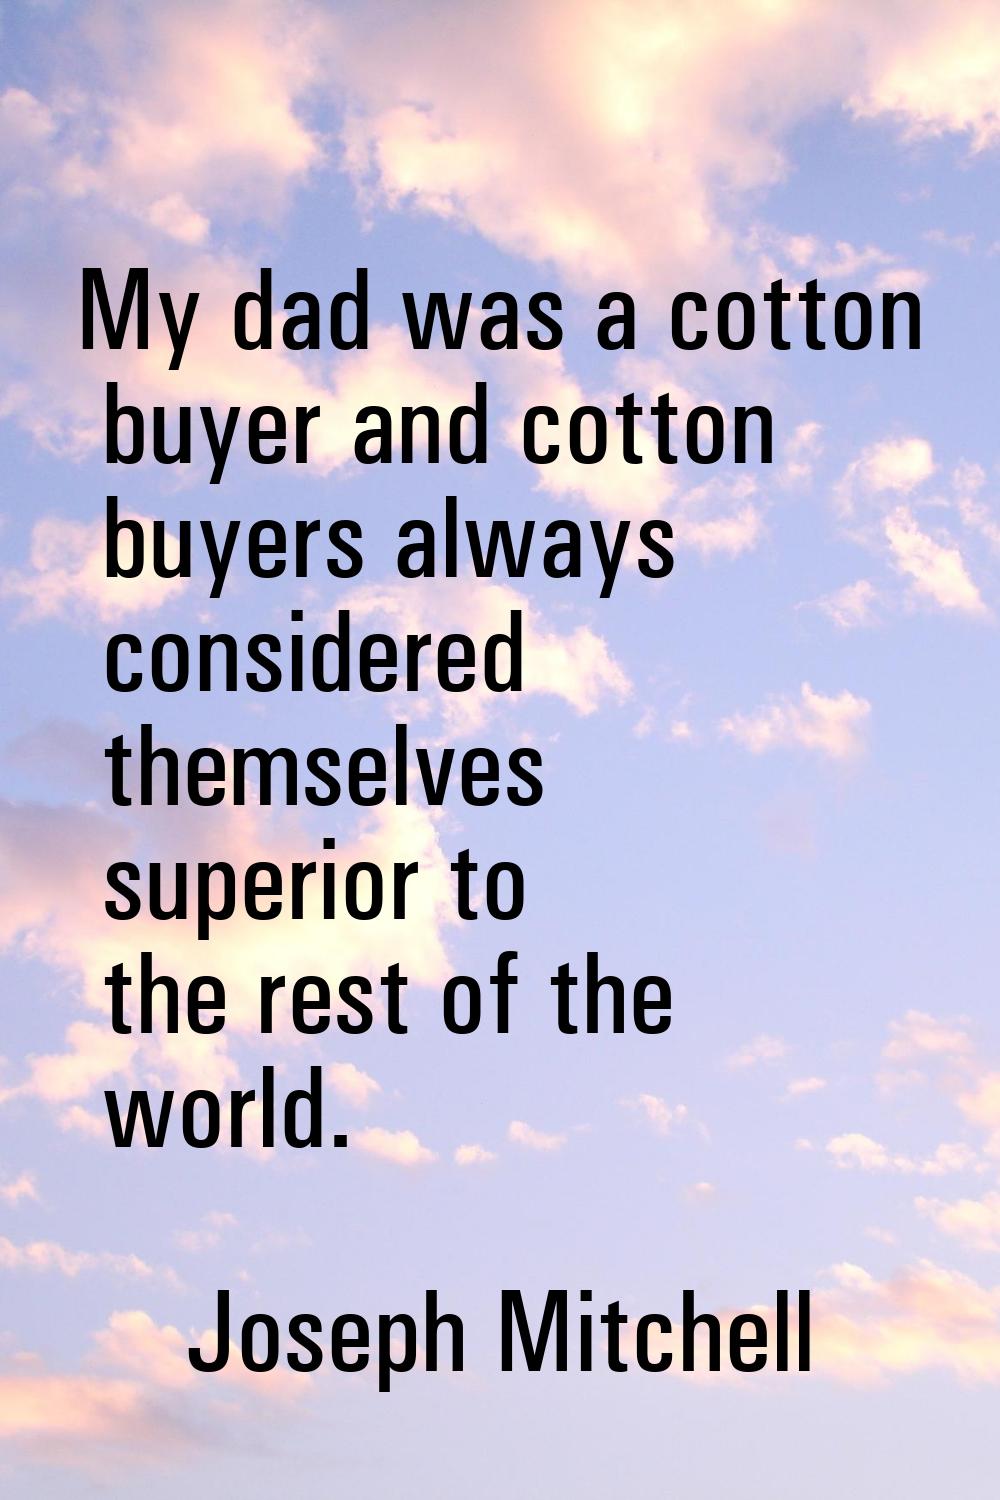 My dad was a cotton buyer and cotton buyers always considered themselves superior to the rest of th